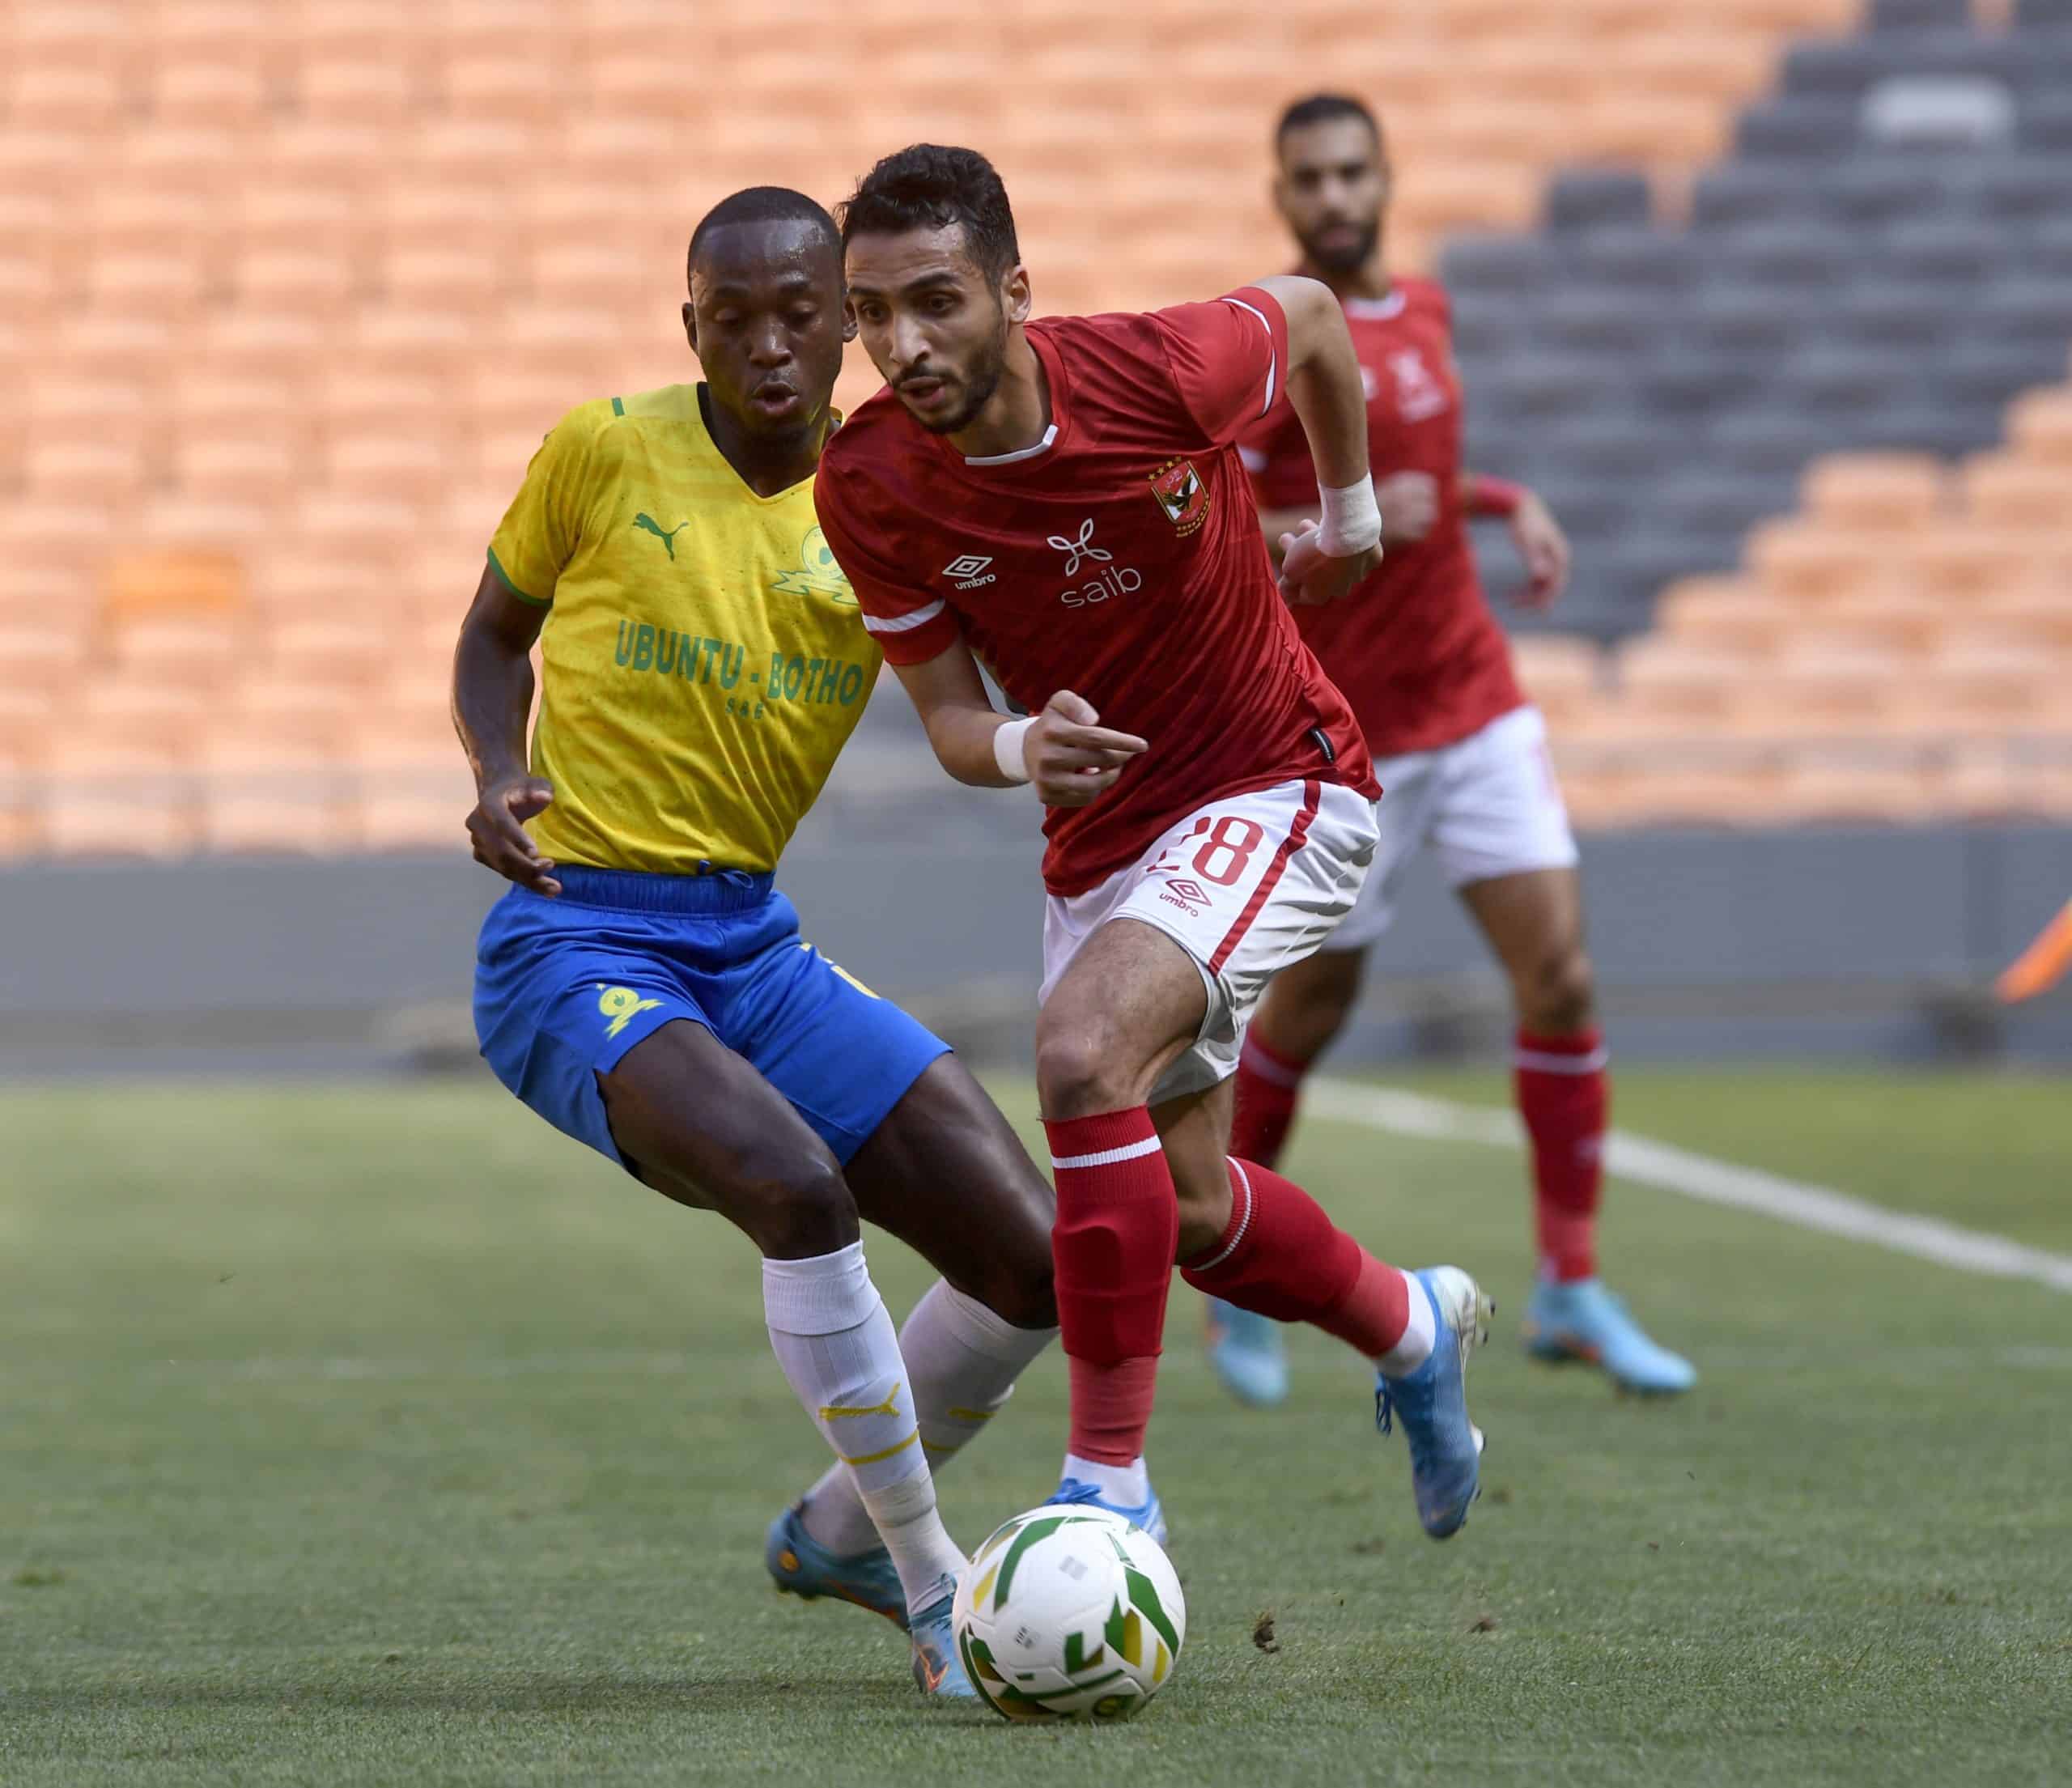 You are currently viewing Highlights: Sundowns qualifier for quarters, AmaZulu suffer setback